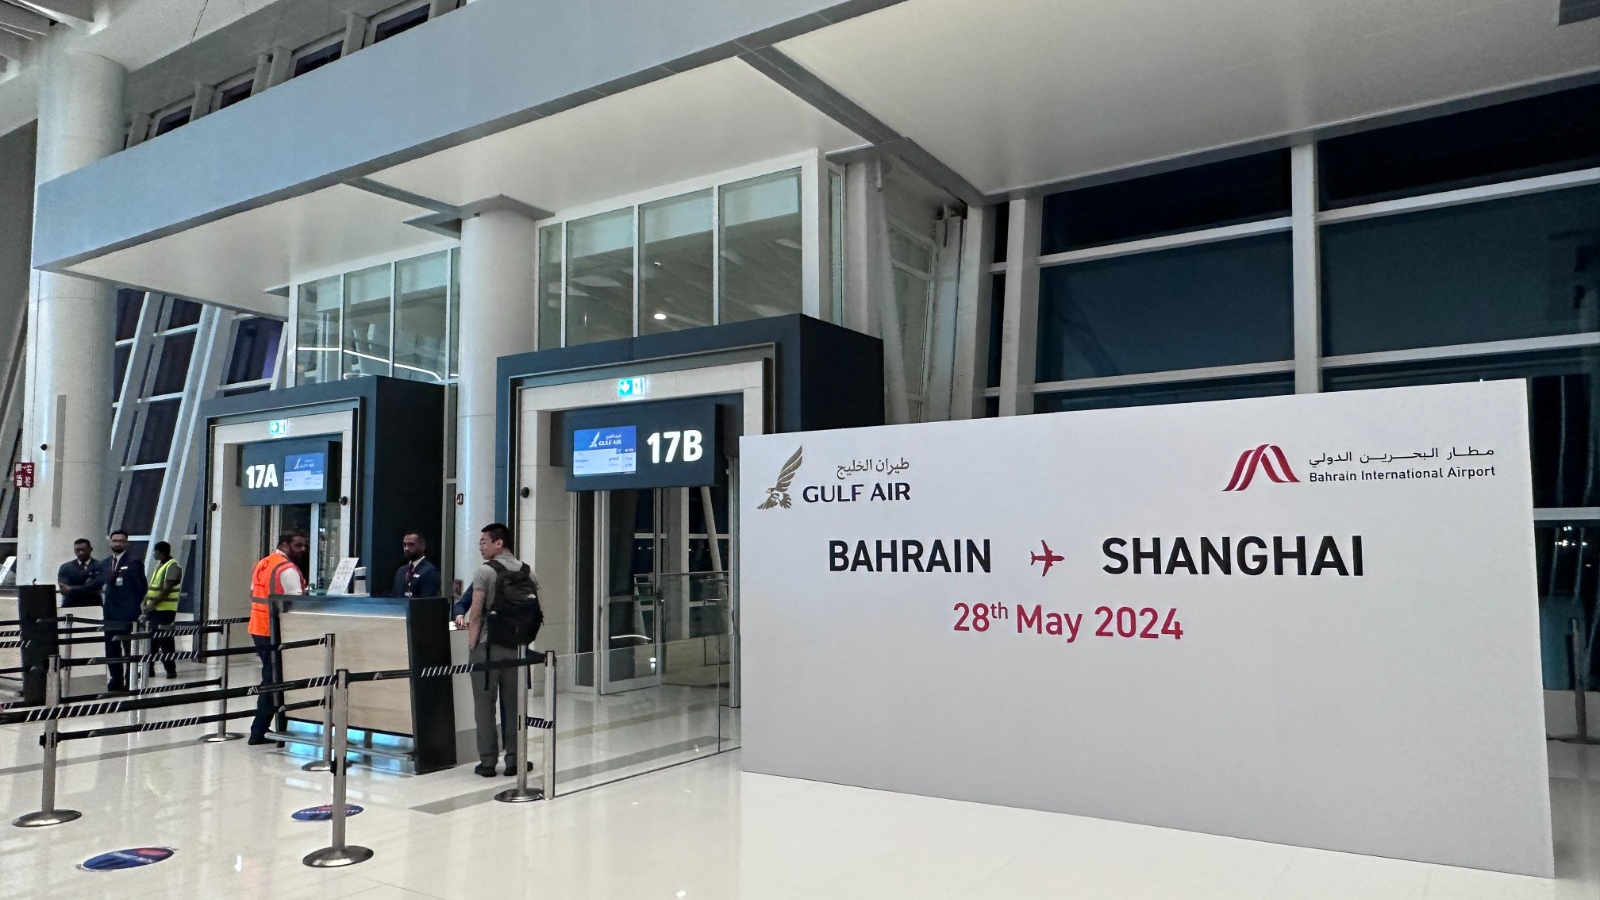 A display board at the International Airport in Bahrain announces the inaugural direct flight from Bahrain to China's Shanghai, May 28, 2024. /China Media Group